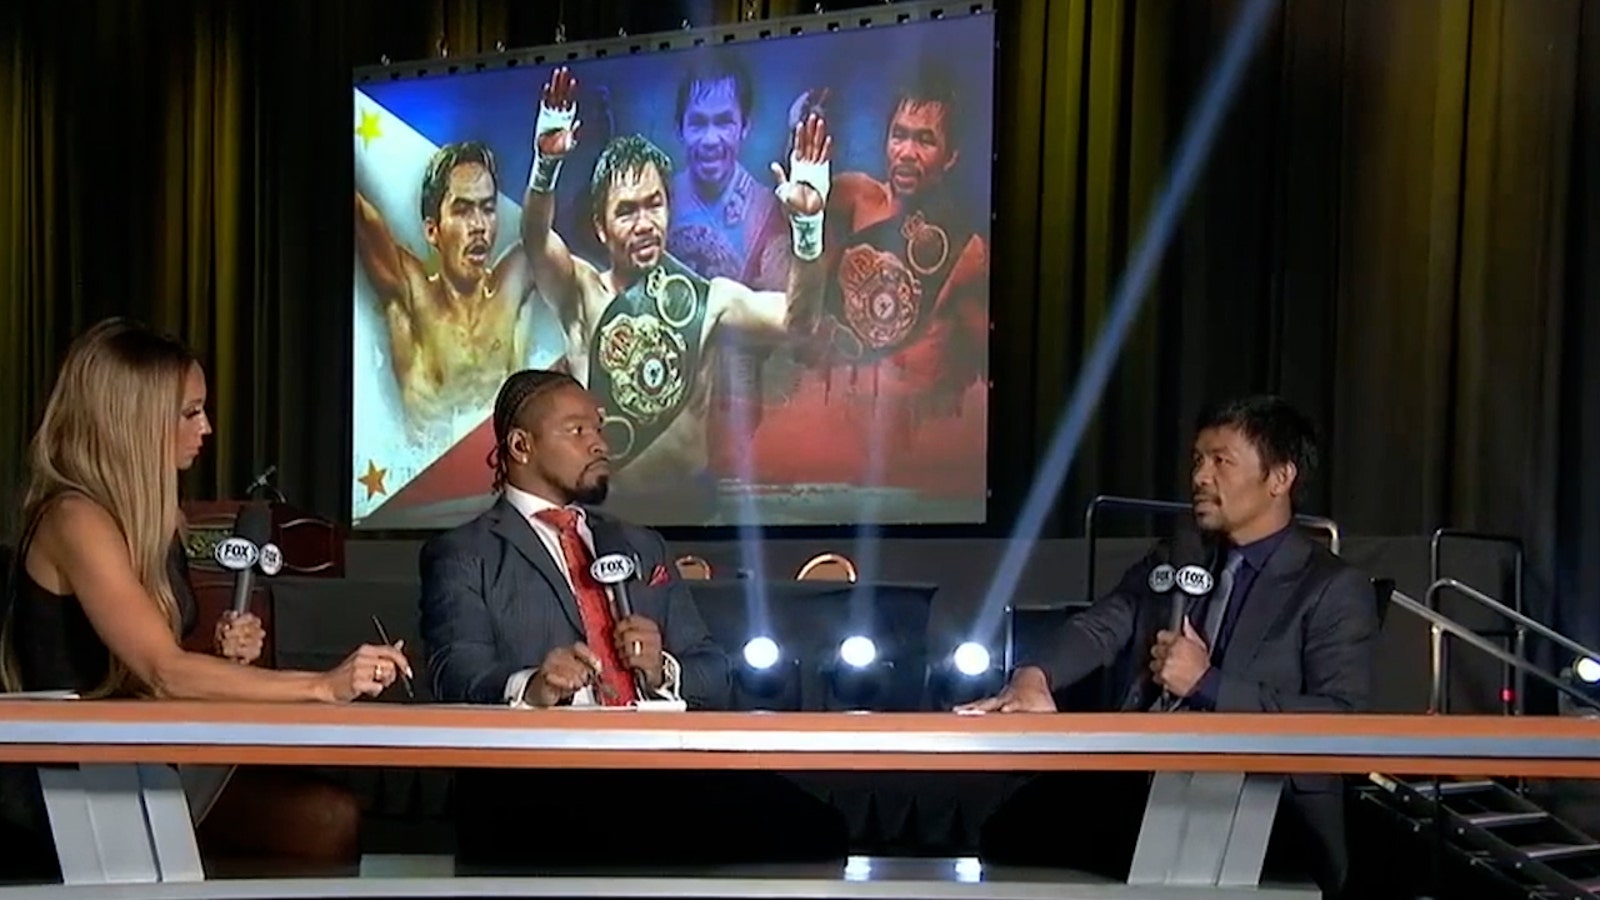 Shawn Porter and Kate Abdo interview Manny Pacquiao about Ugas fight, legacy & more